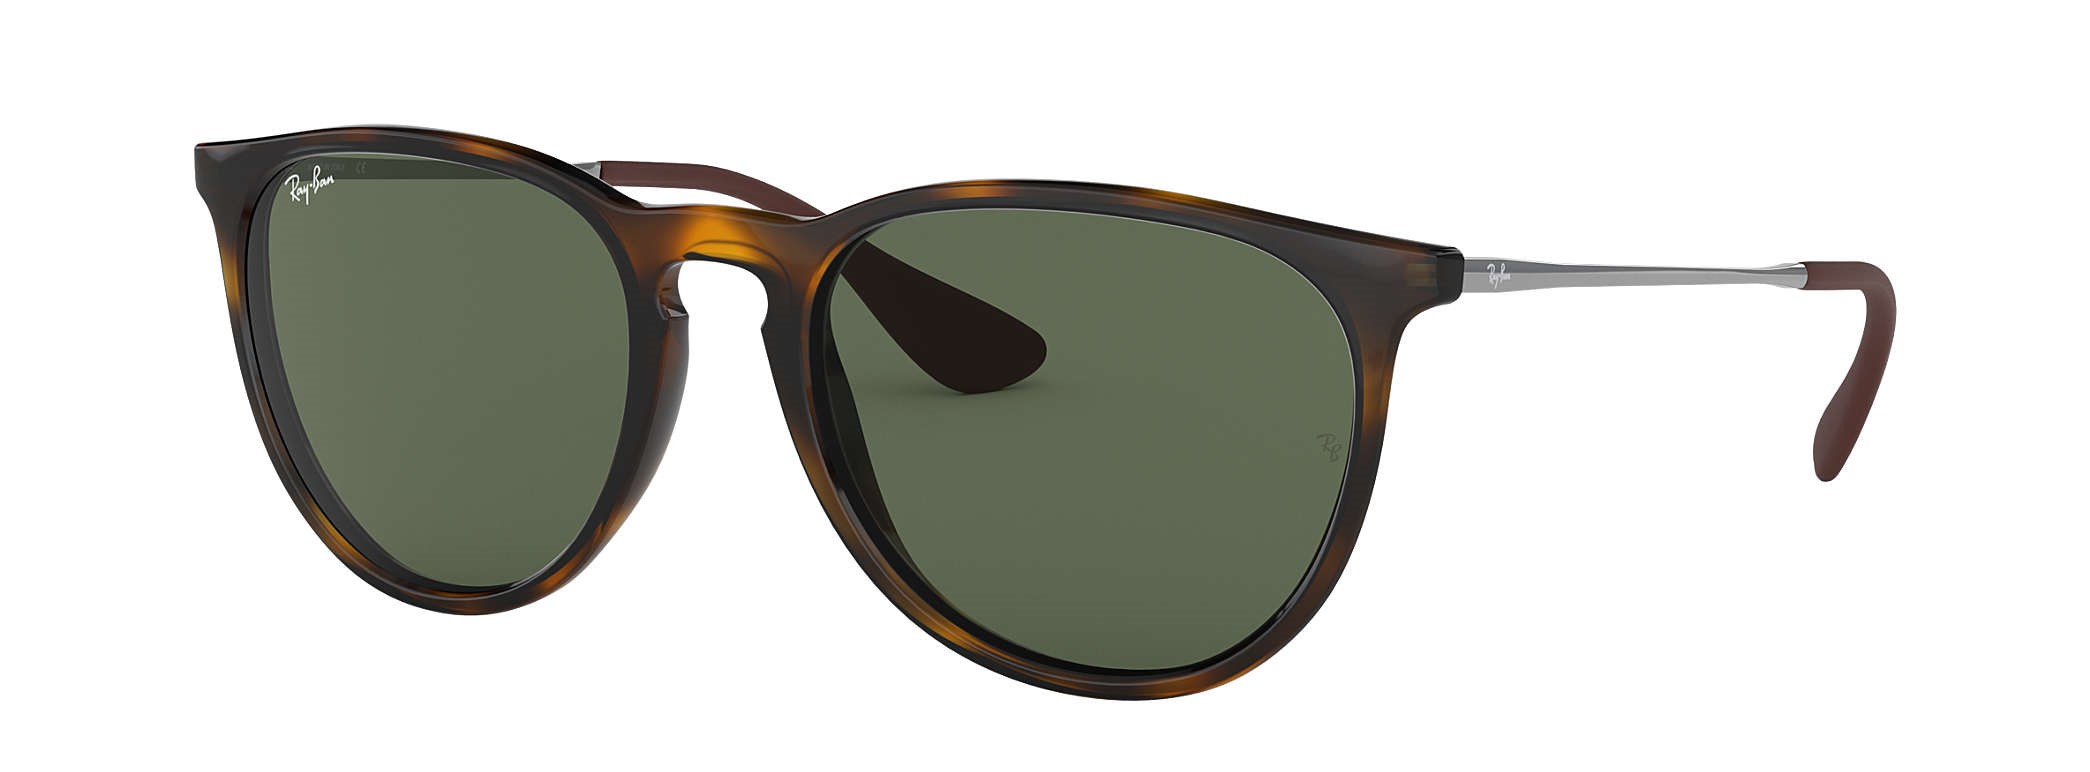 ray-ban round sunglasses rb4171 erika in light havana with green g-15 lenses